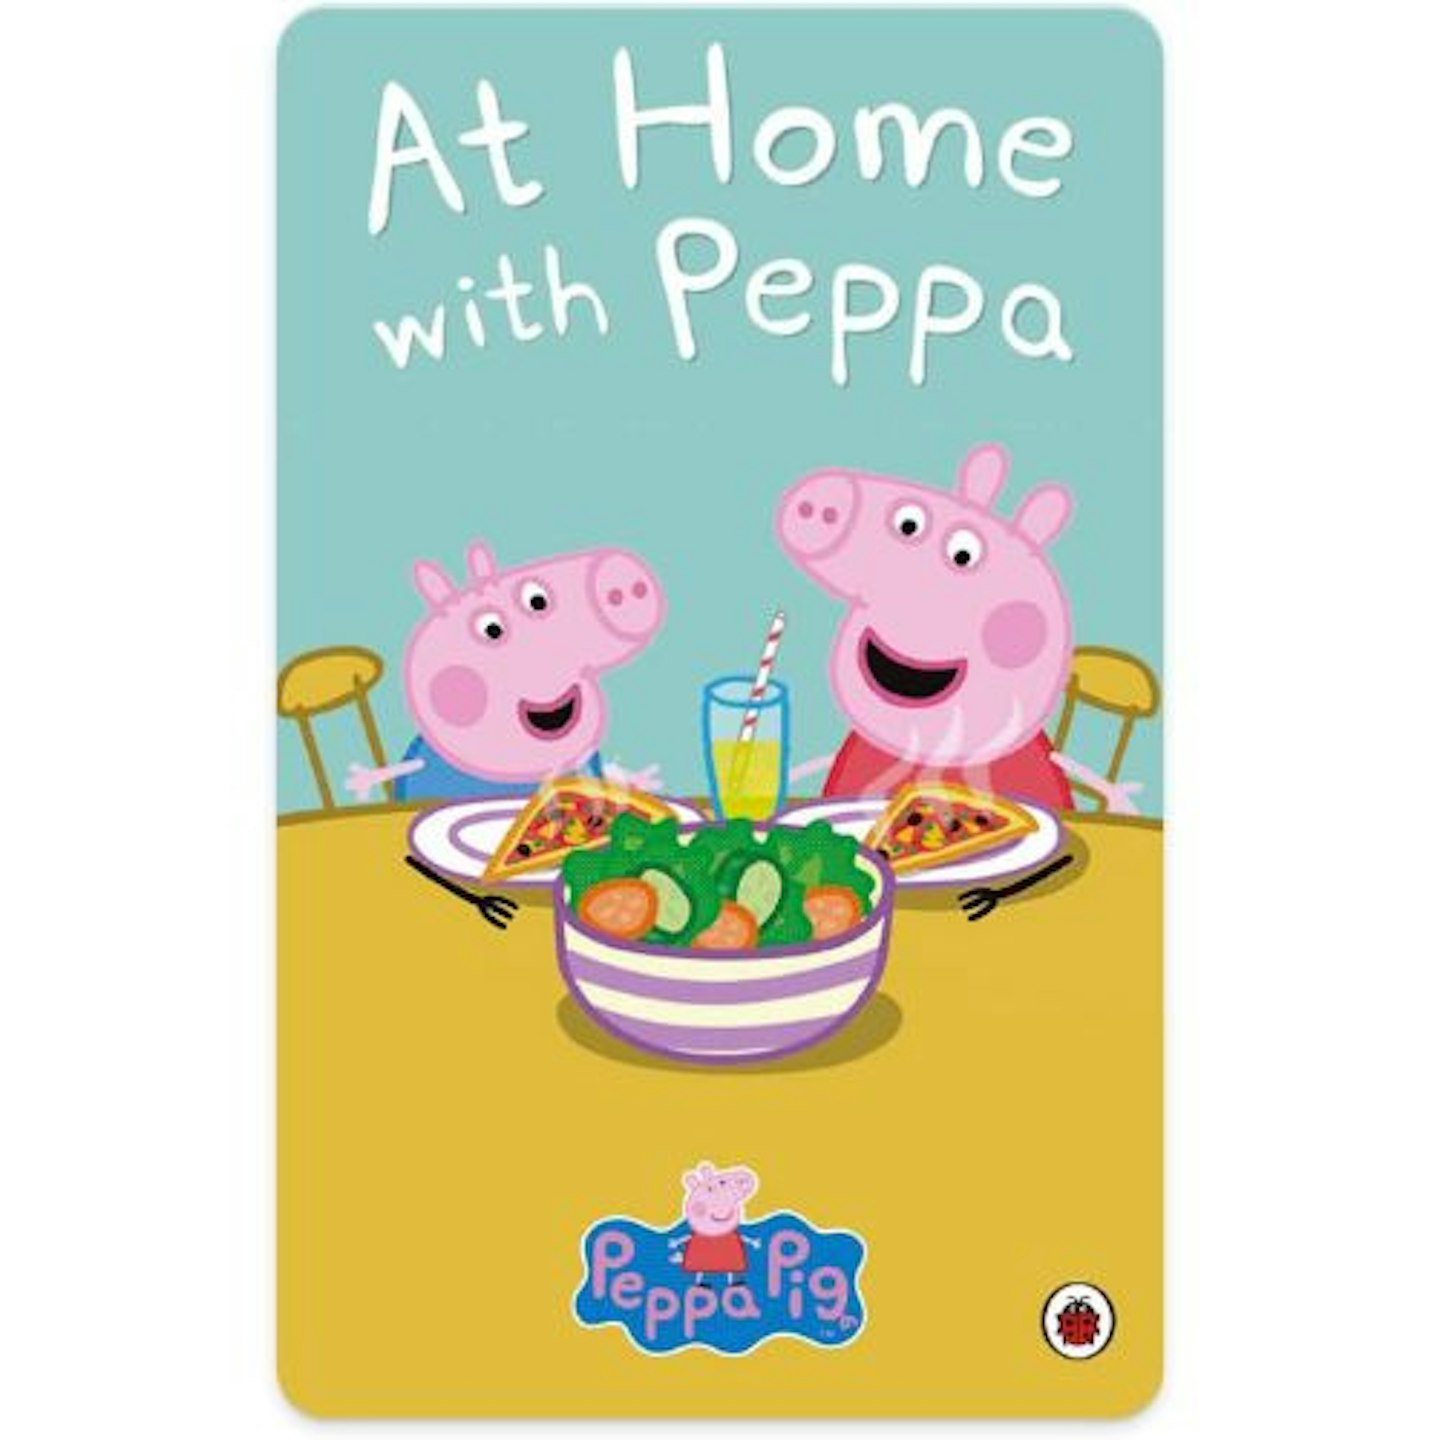 Best Yoto Player story cards Yoto Peppa Pig: At Home with Peppa, by Ladybird